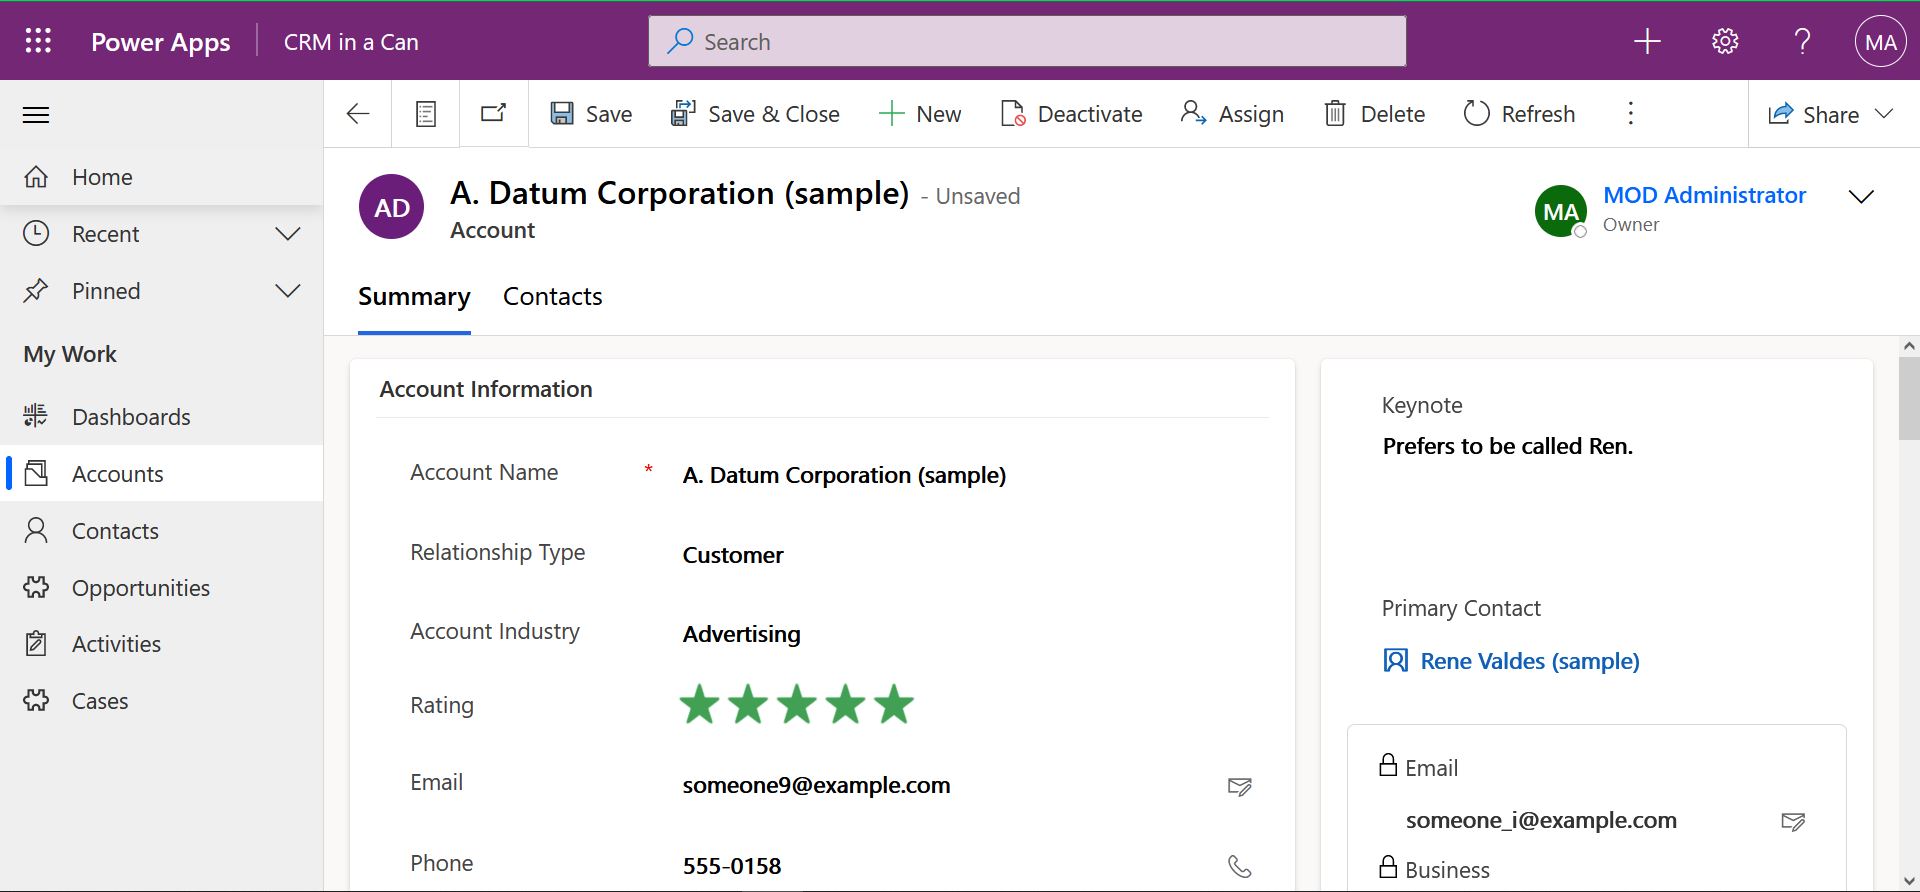 Screenshot of an account in CRM in a Can